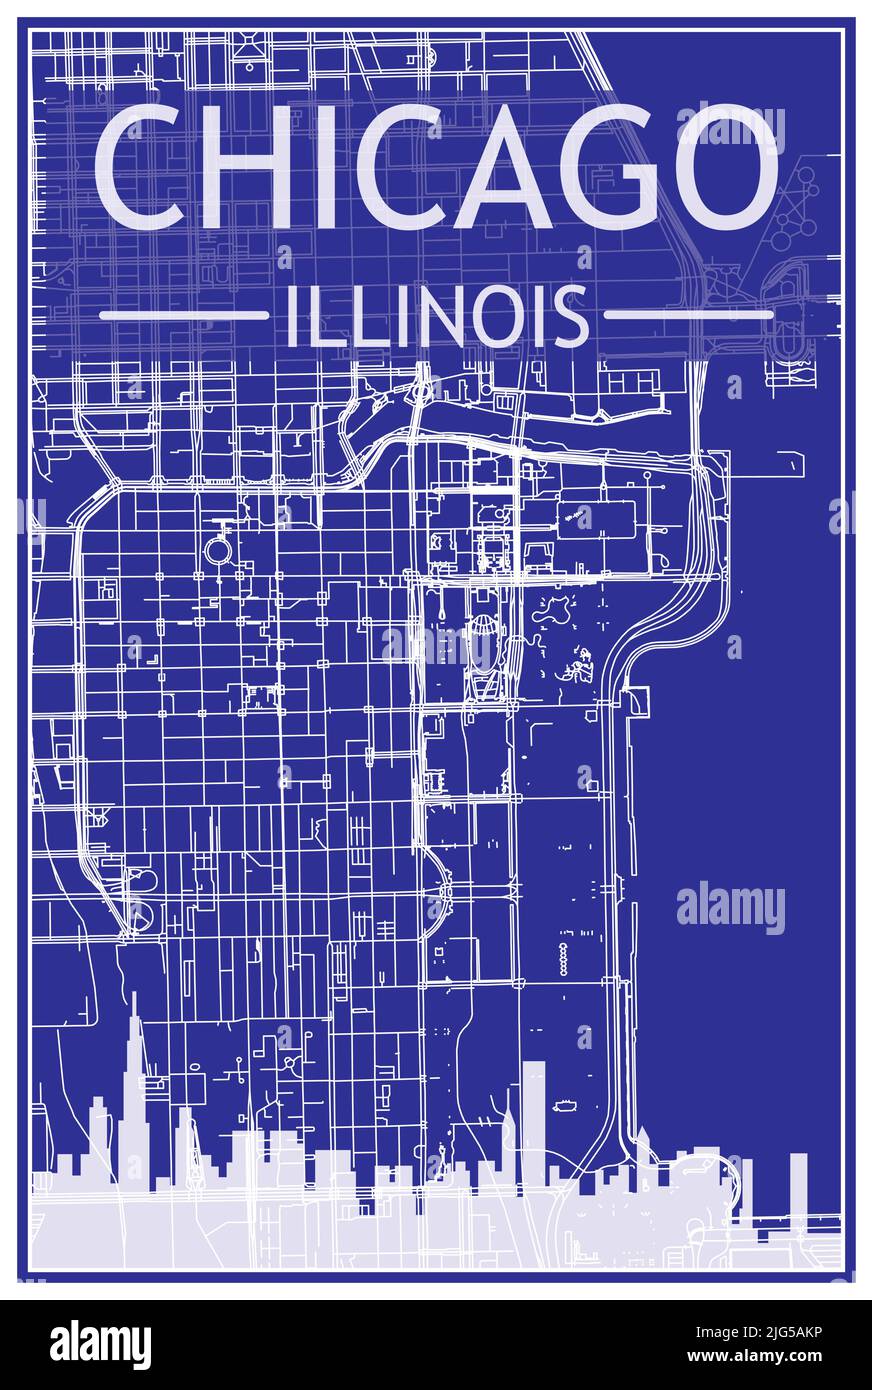 Technical drawing printout city poster with panoramic skyline and streets network on blue background of the downtown CHICAGO, ILLINOIS Stock Vector